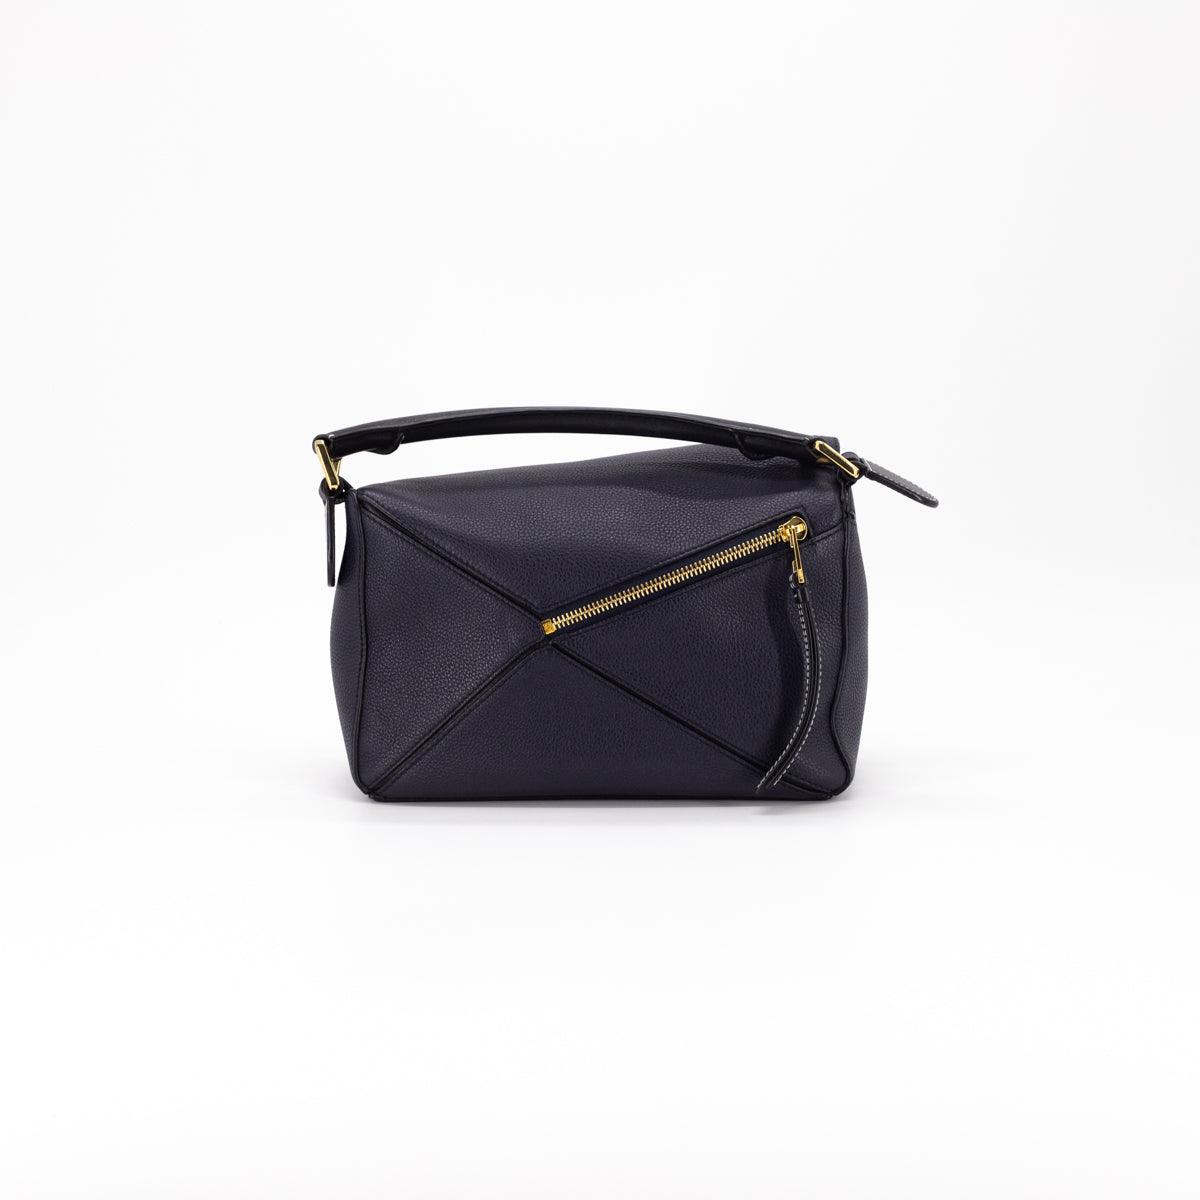 Got my dream Loewe small puzzle bag in midnight navy/black, pre-loved but  in stellar condition! I wanted one in a dark color with gold hardware and  this was one of the only